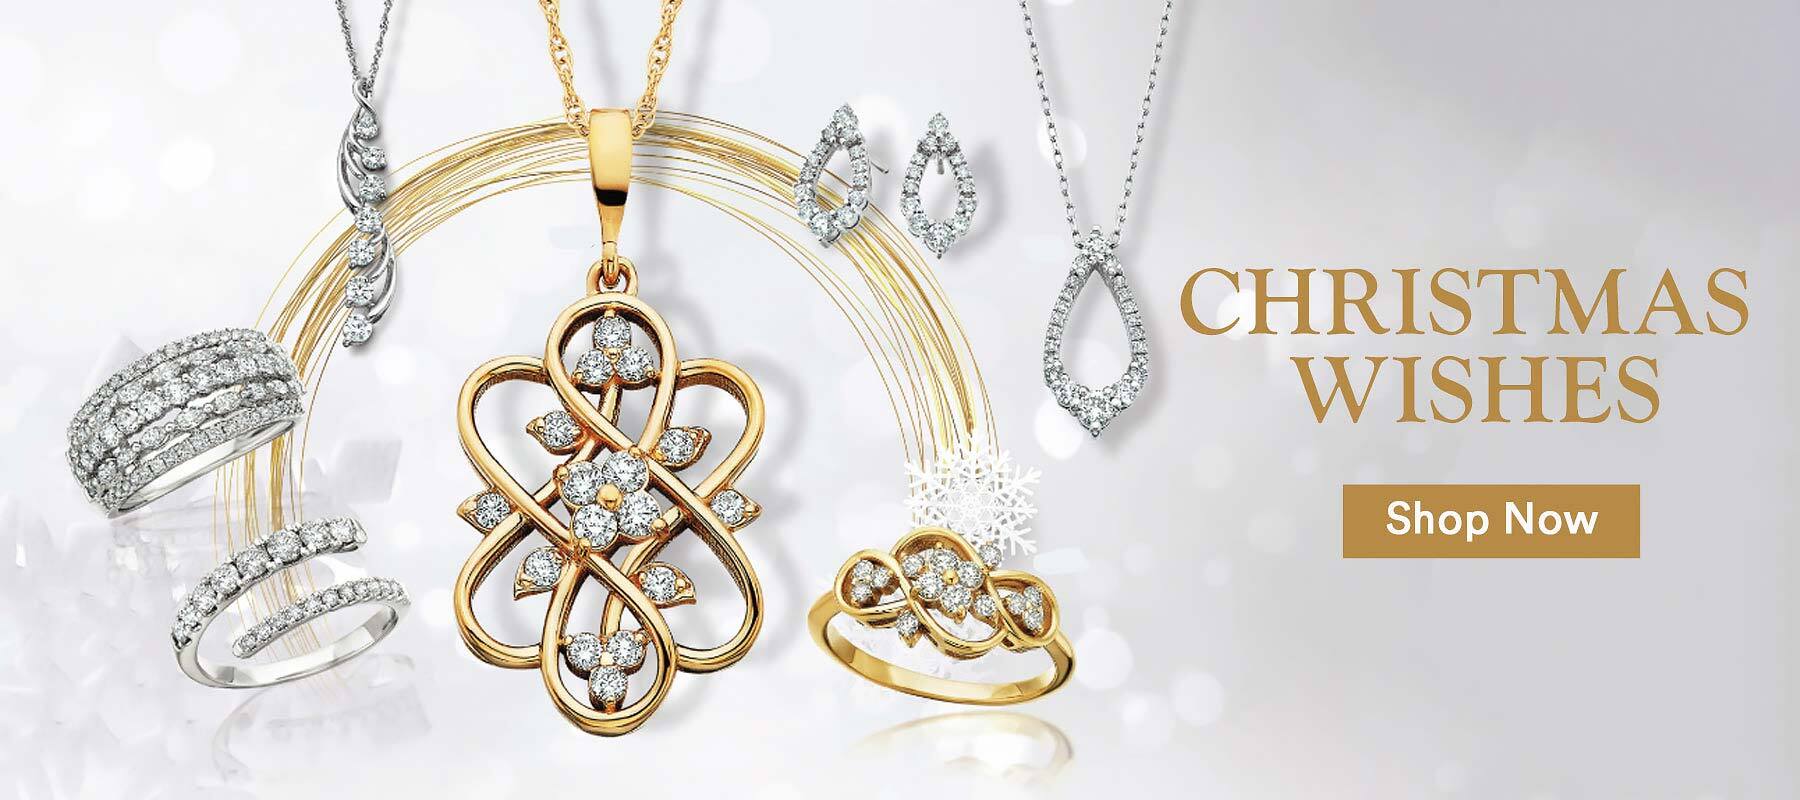 Christmas Wishes From Zembar Jewelers